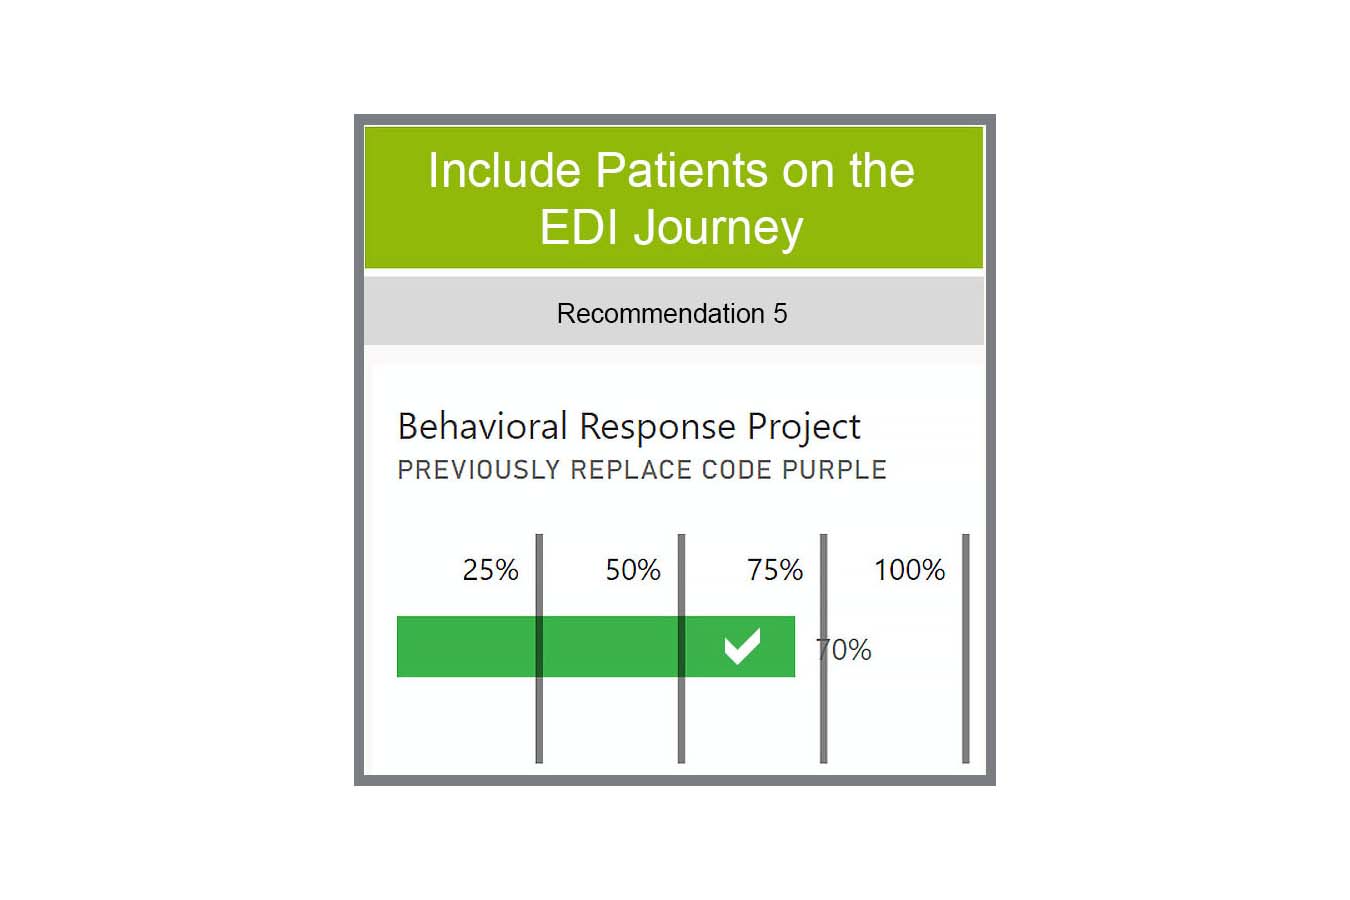 Include patients in the EDI journey recommendation 5 graphic